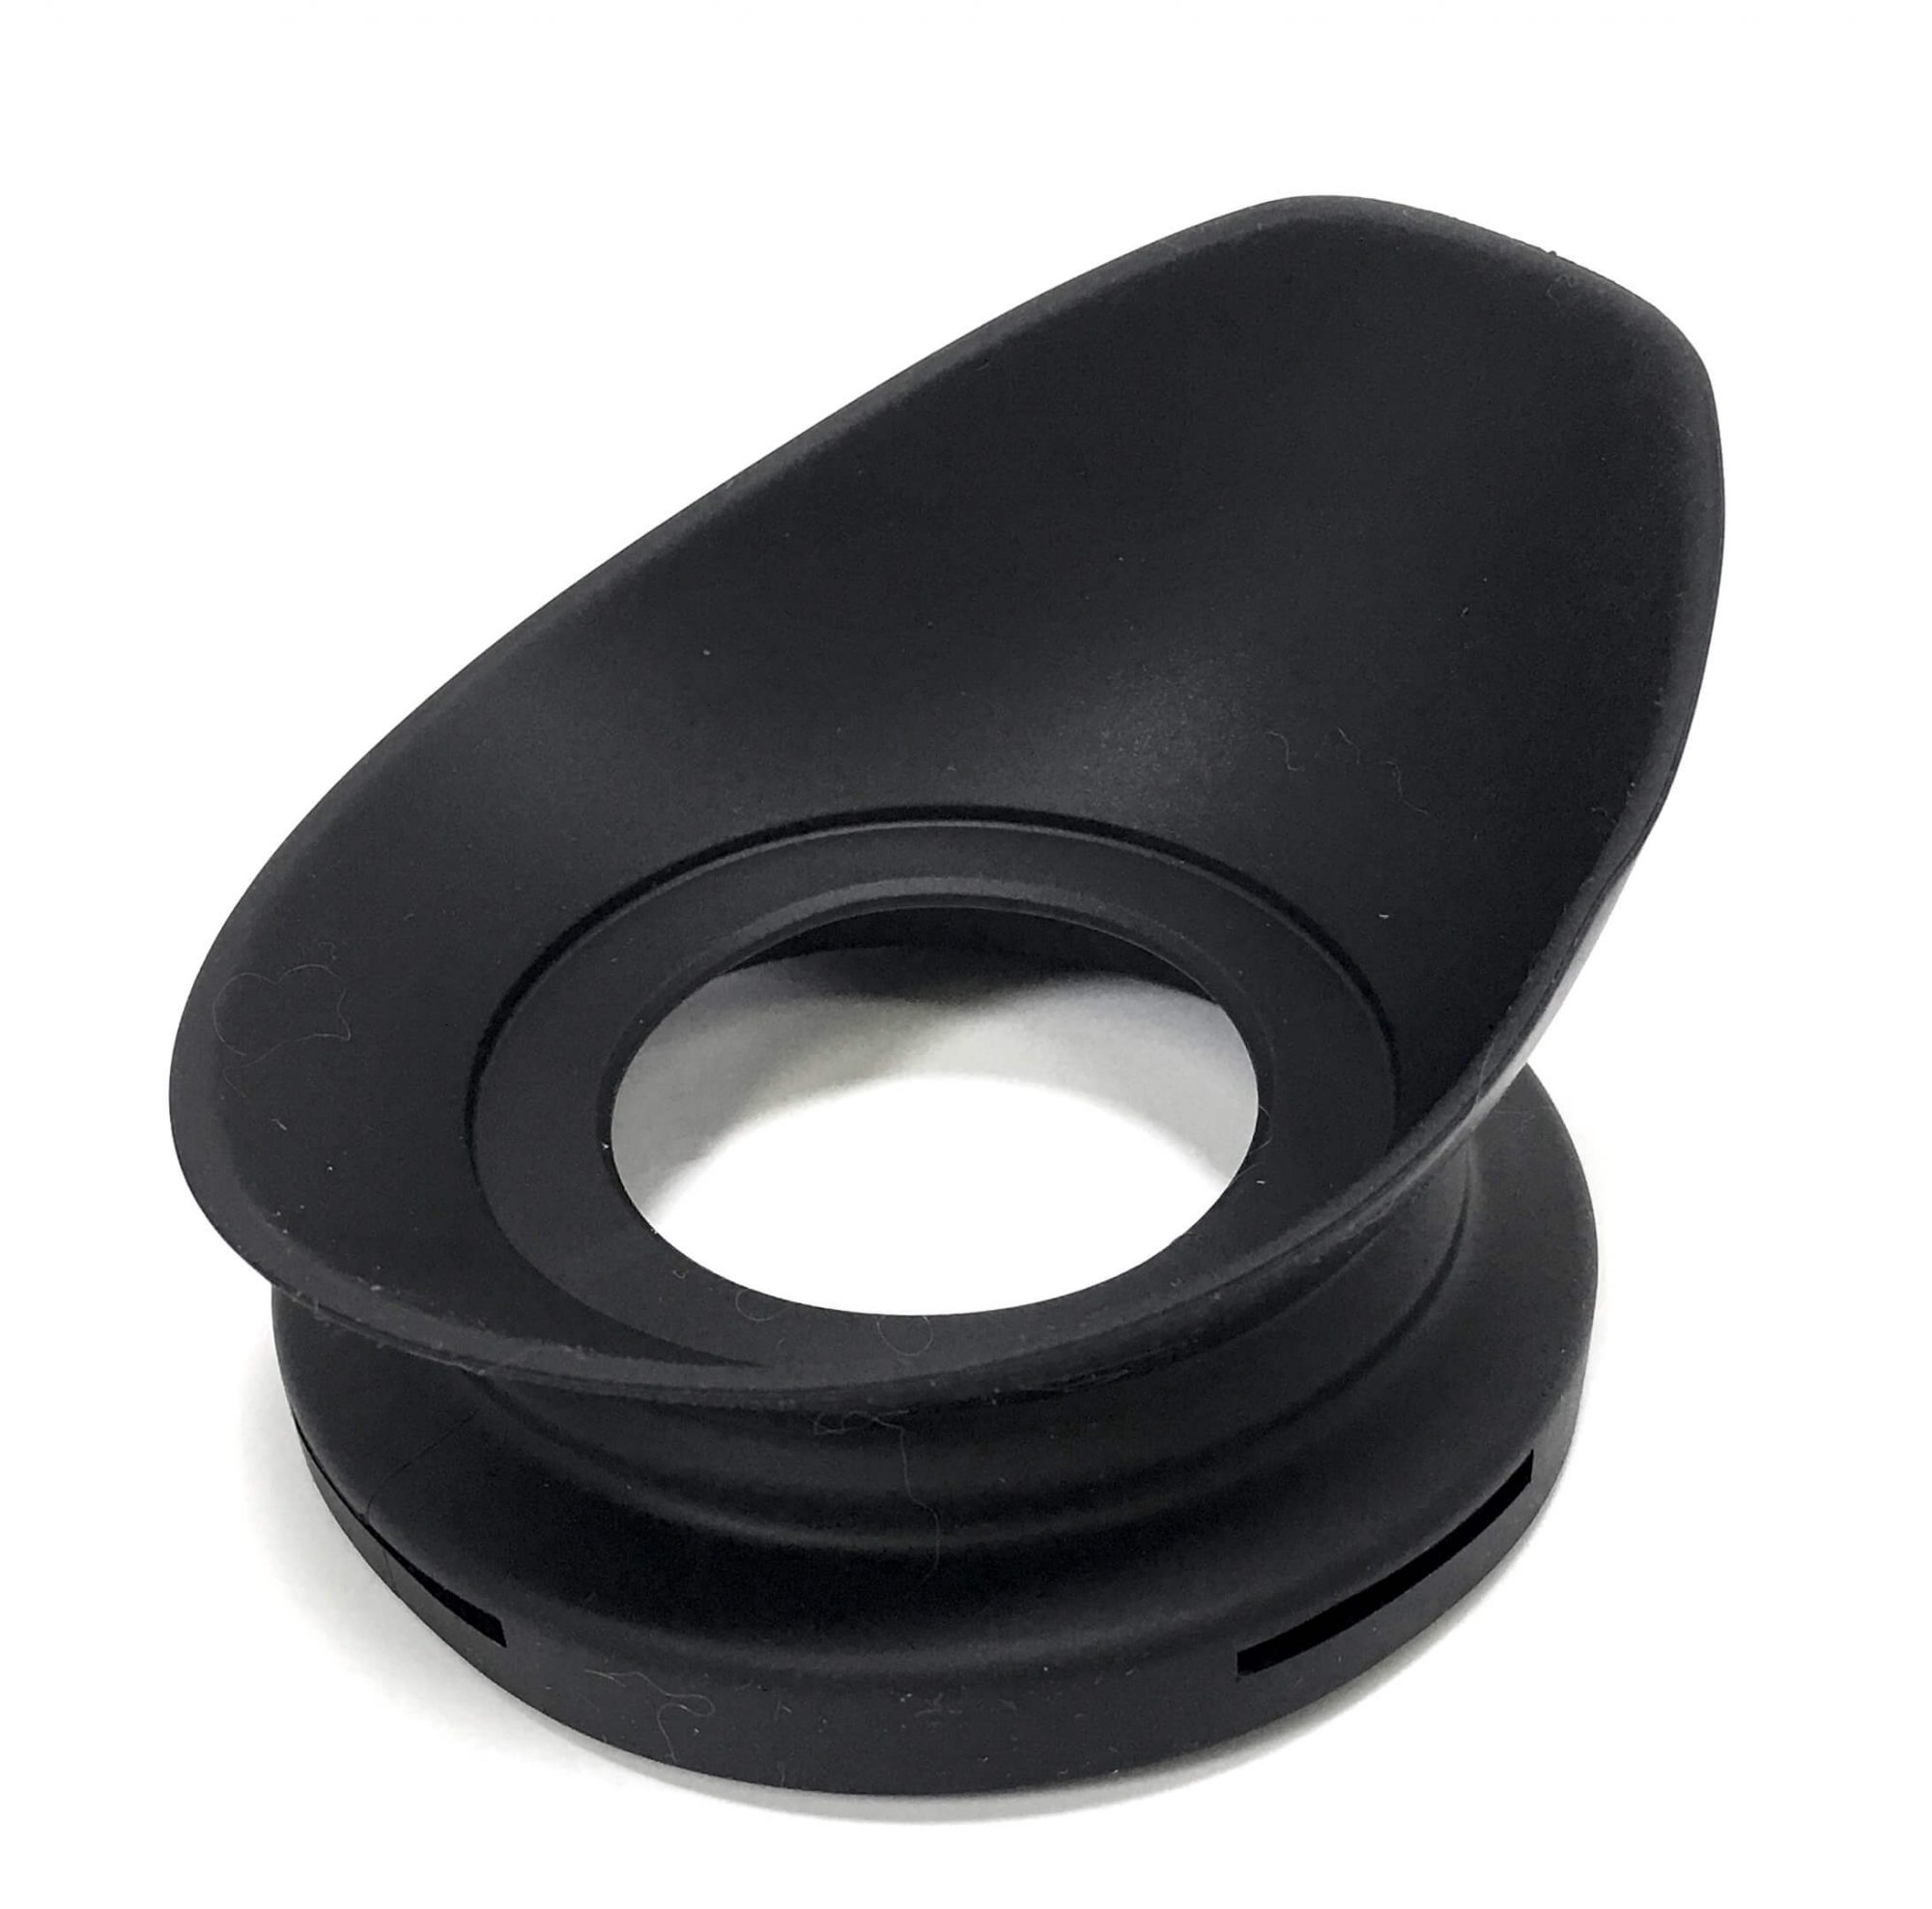 Original Eye Cup that fits on the Sony PXW-FS7 camcorder. It is a genuine Sony part, sourced directly from Sony USA. Brand new factory fresh. Free Shipping.